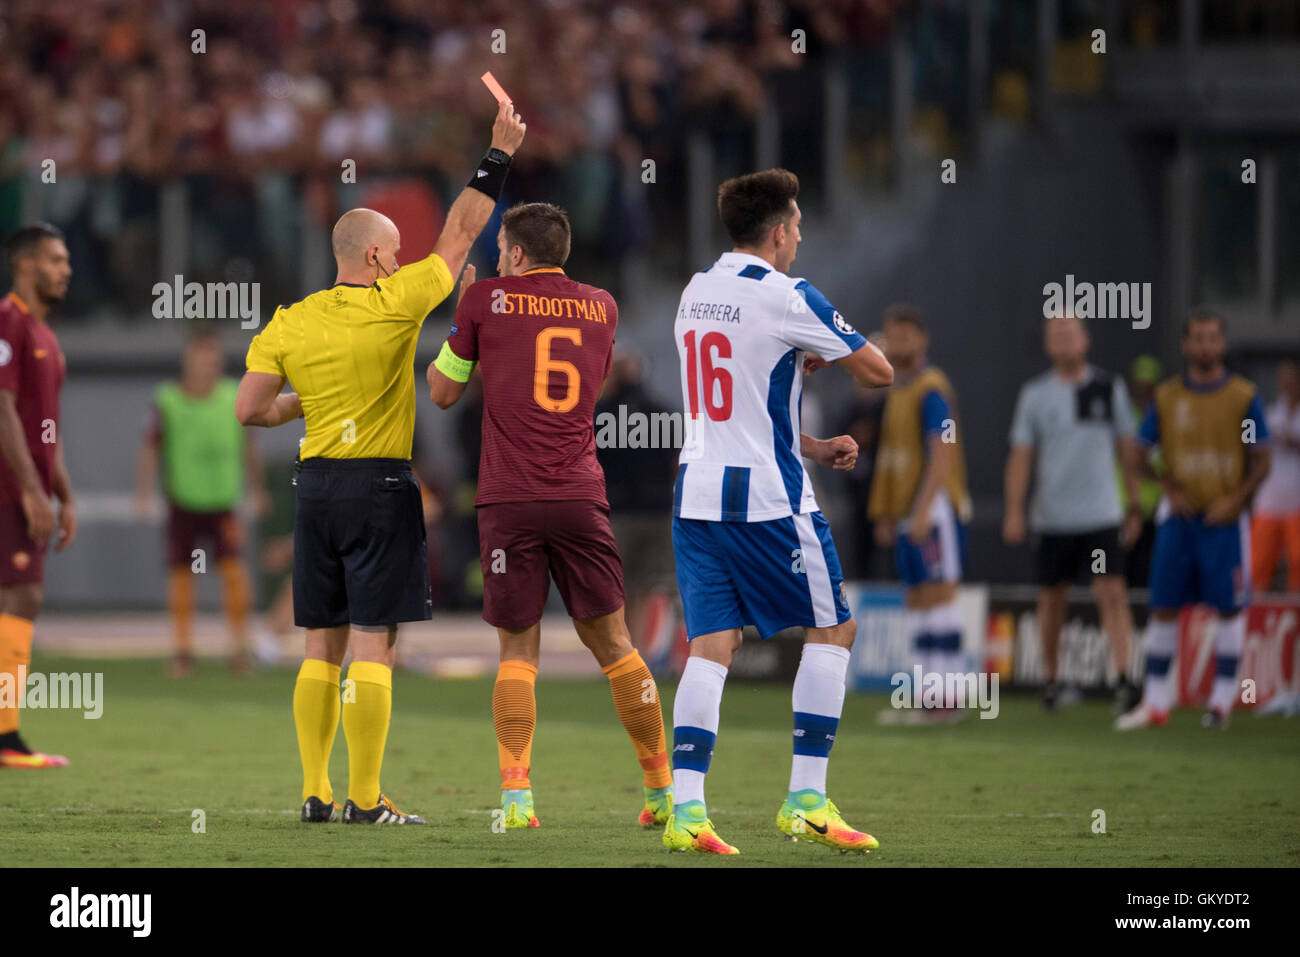 Szymon Marciniak (Referee), AUGUST 23, 2016 - Football / Soccer : Referee Szymon Marciniak shows a red card to Emerson of AS Roma during the UEFA Champions League Play-off 2nd leg match between AC Roma 0-3 FC Porto at Stadio Olimpico in Rome, Italy. (Photo by Maurizio Borsari/AFLO) Stock Photo